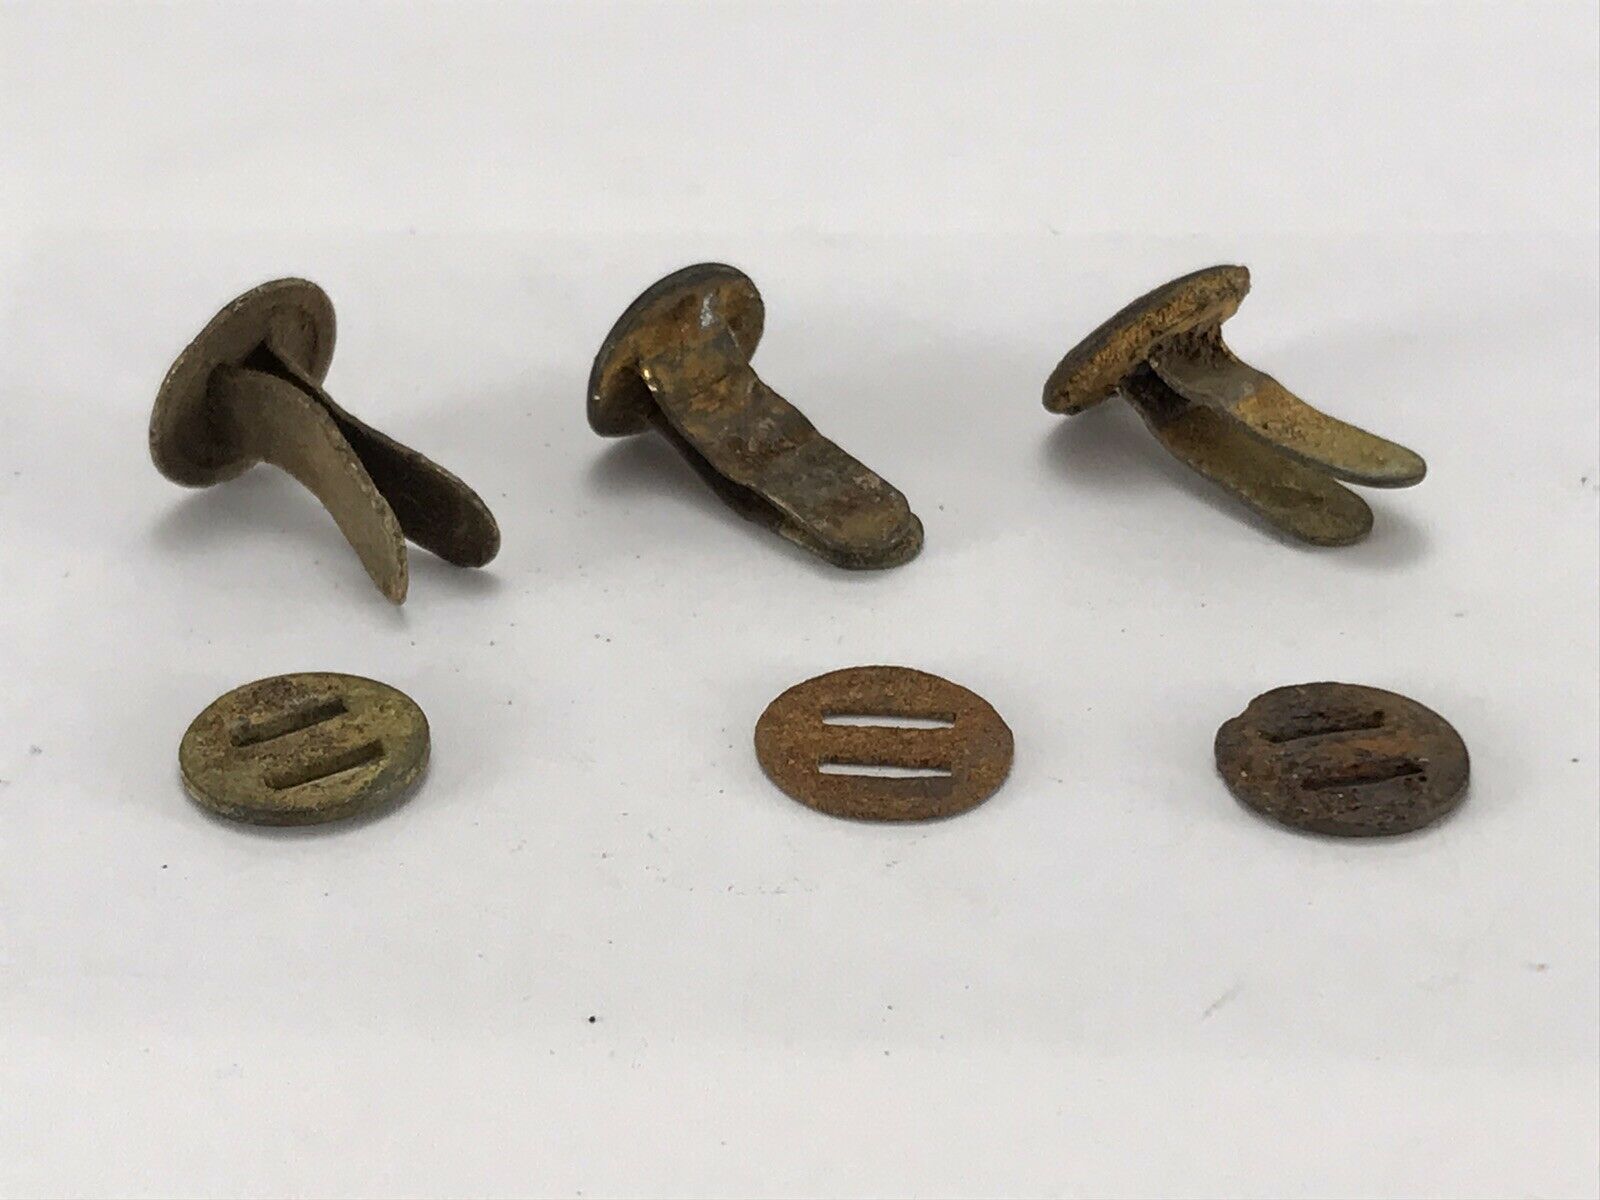 Ww2 Germany Original Helmet Liner Set Of 3 Pins And Washers.